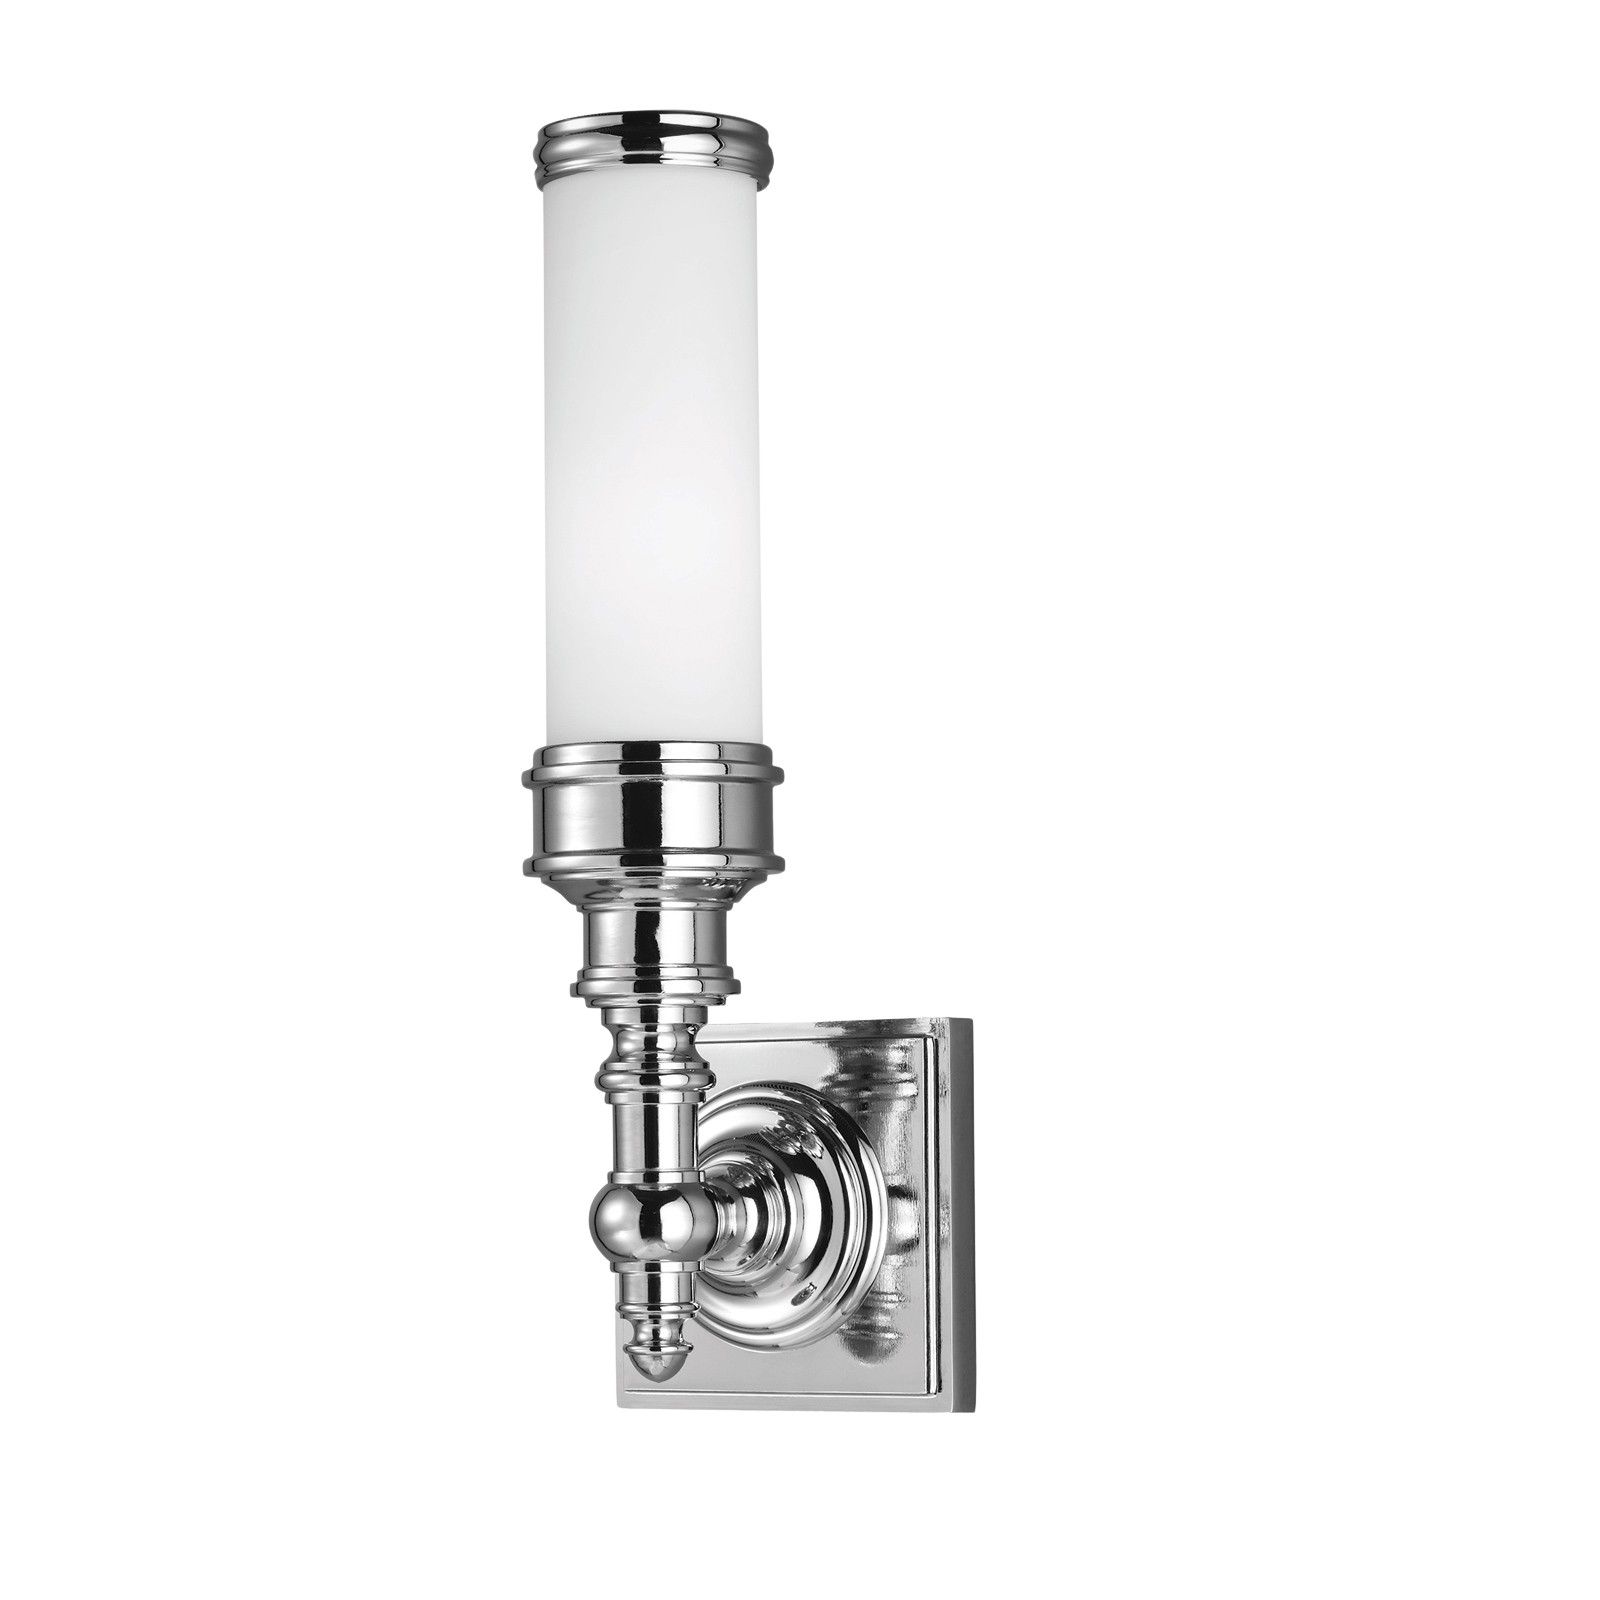 Payne Bathroom single wall light in polished chrome - with ornate lamp holder